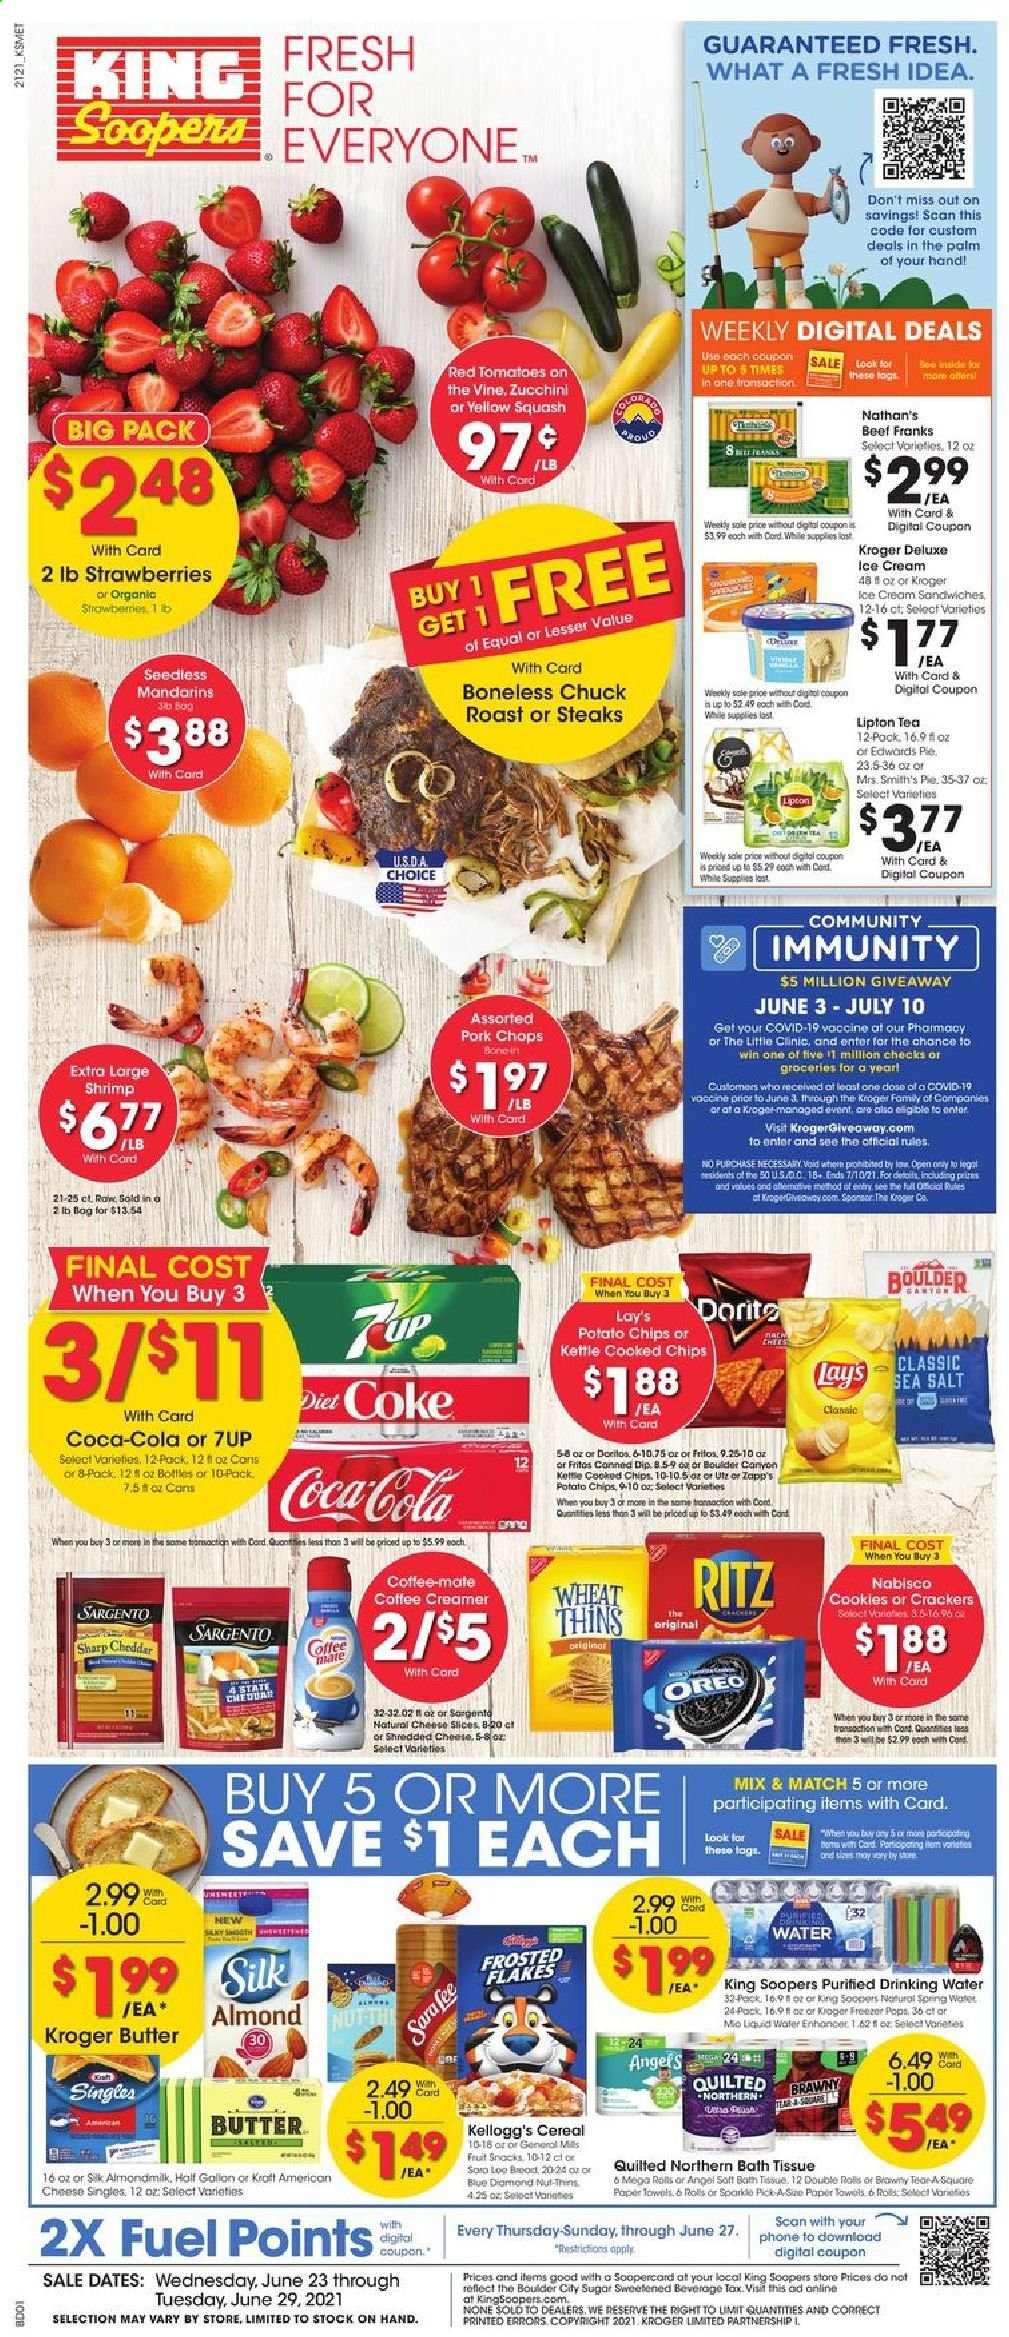 thumbnail - King Soopers Flyer - 06/23/2021 - 06/29/2021 - Sales products - pie, tomatoes, zucchini, yellow squash, mandarines, strawberries, shrimps, Kraft®, american cheese, sliced cheese, cheese, Sargento, Oreo, almond milk, Coffee-Mate, butter, creamer, dip, ice cream, cookies, crackers, Kellogg's, fruit snack, RITZ, Doritos, Fritos, potato chips, chips, Lay’s, Smith's, Thins, sugar, cereals, Frosted Flakes, Coca-Cola, Lipton, 7UP, tea, beef meat, steak, chuck roast, pork chops, pork meat, bath tissue, Quilted Northern, Sharp, paper, freezer, car battery. Page 1.